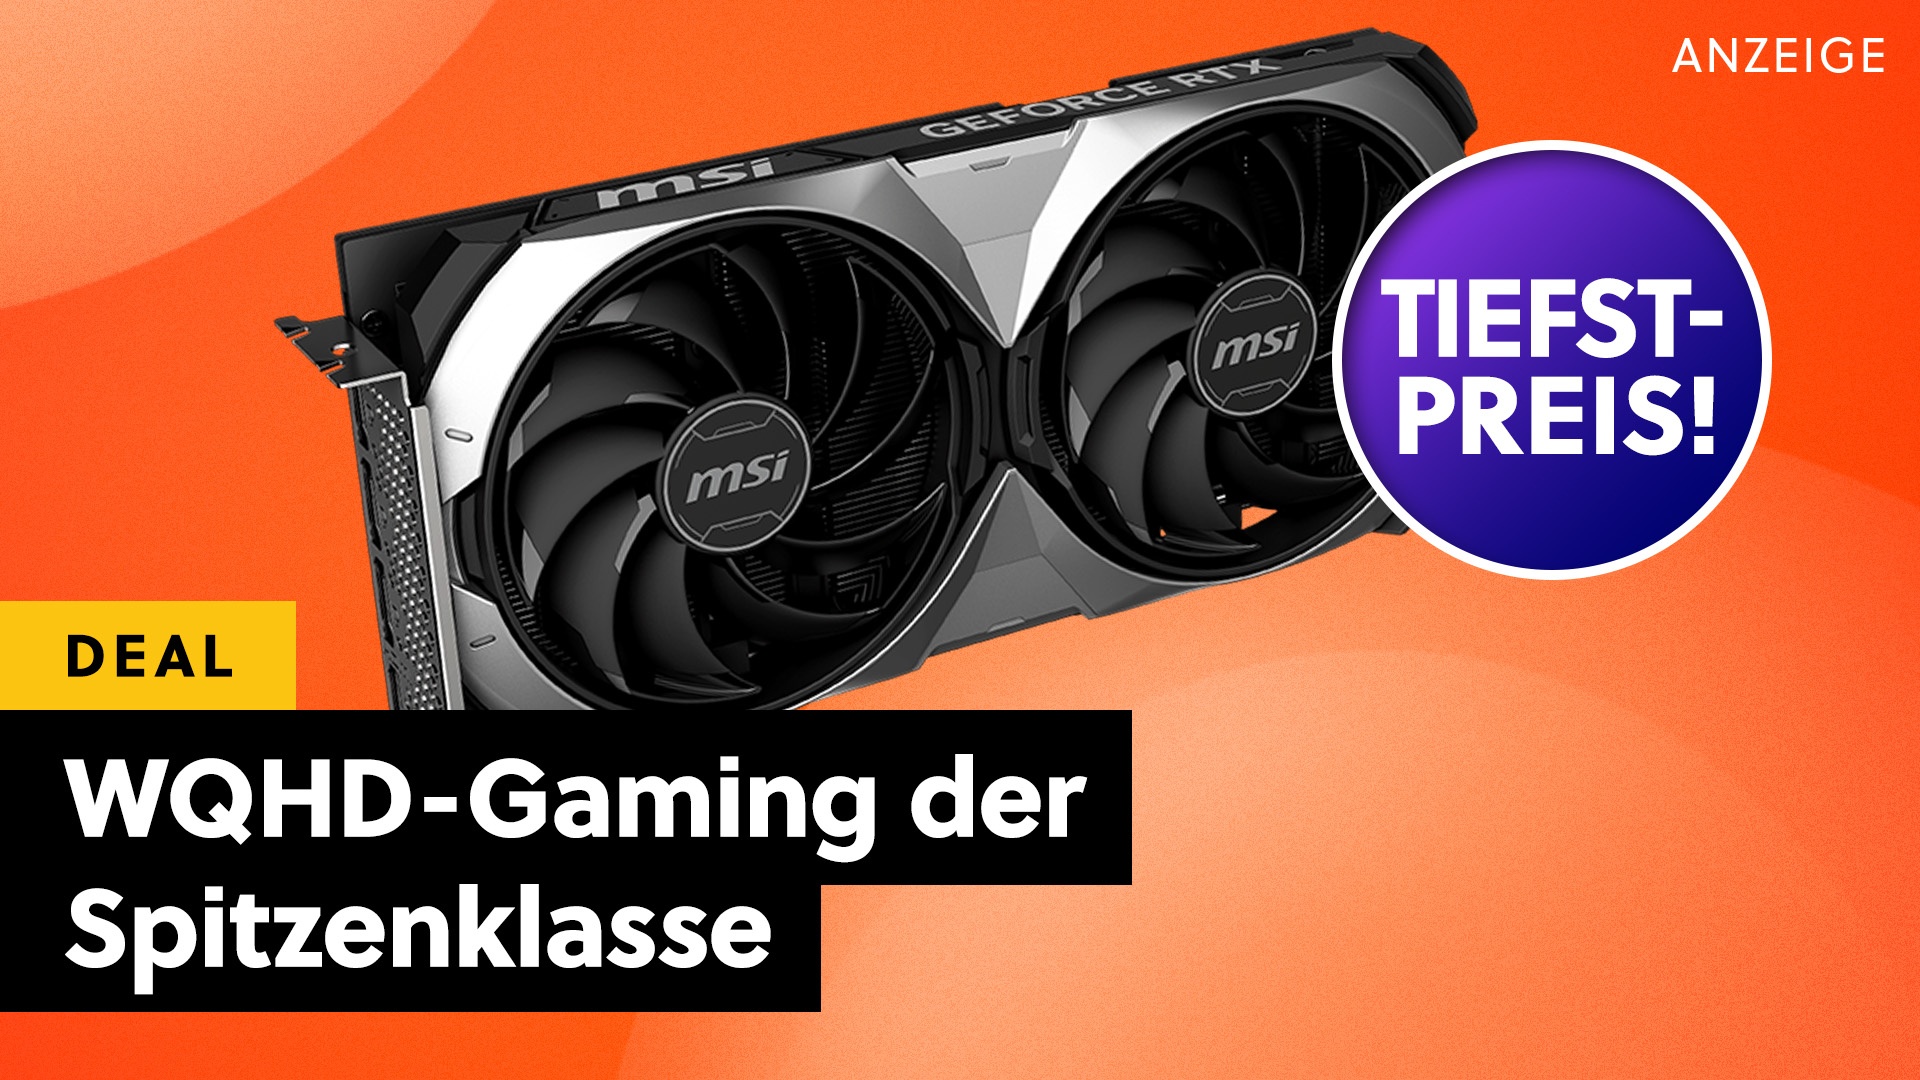 The best Nvidia graphics cards for WQHD gaming with ray tracing are probably cheaper now than ever!